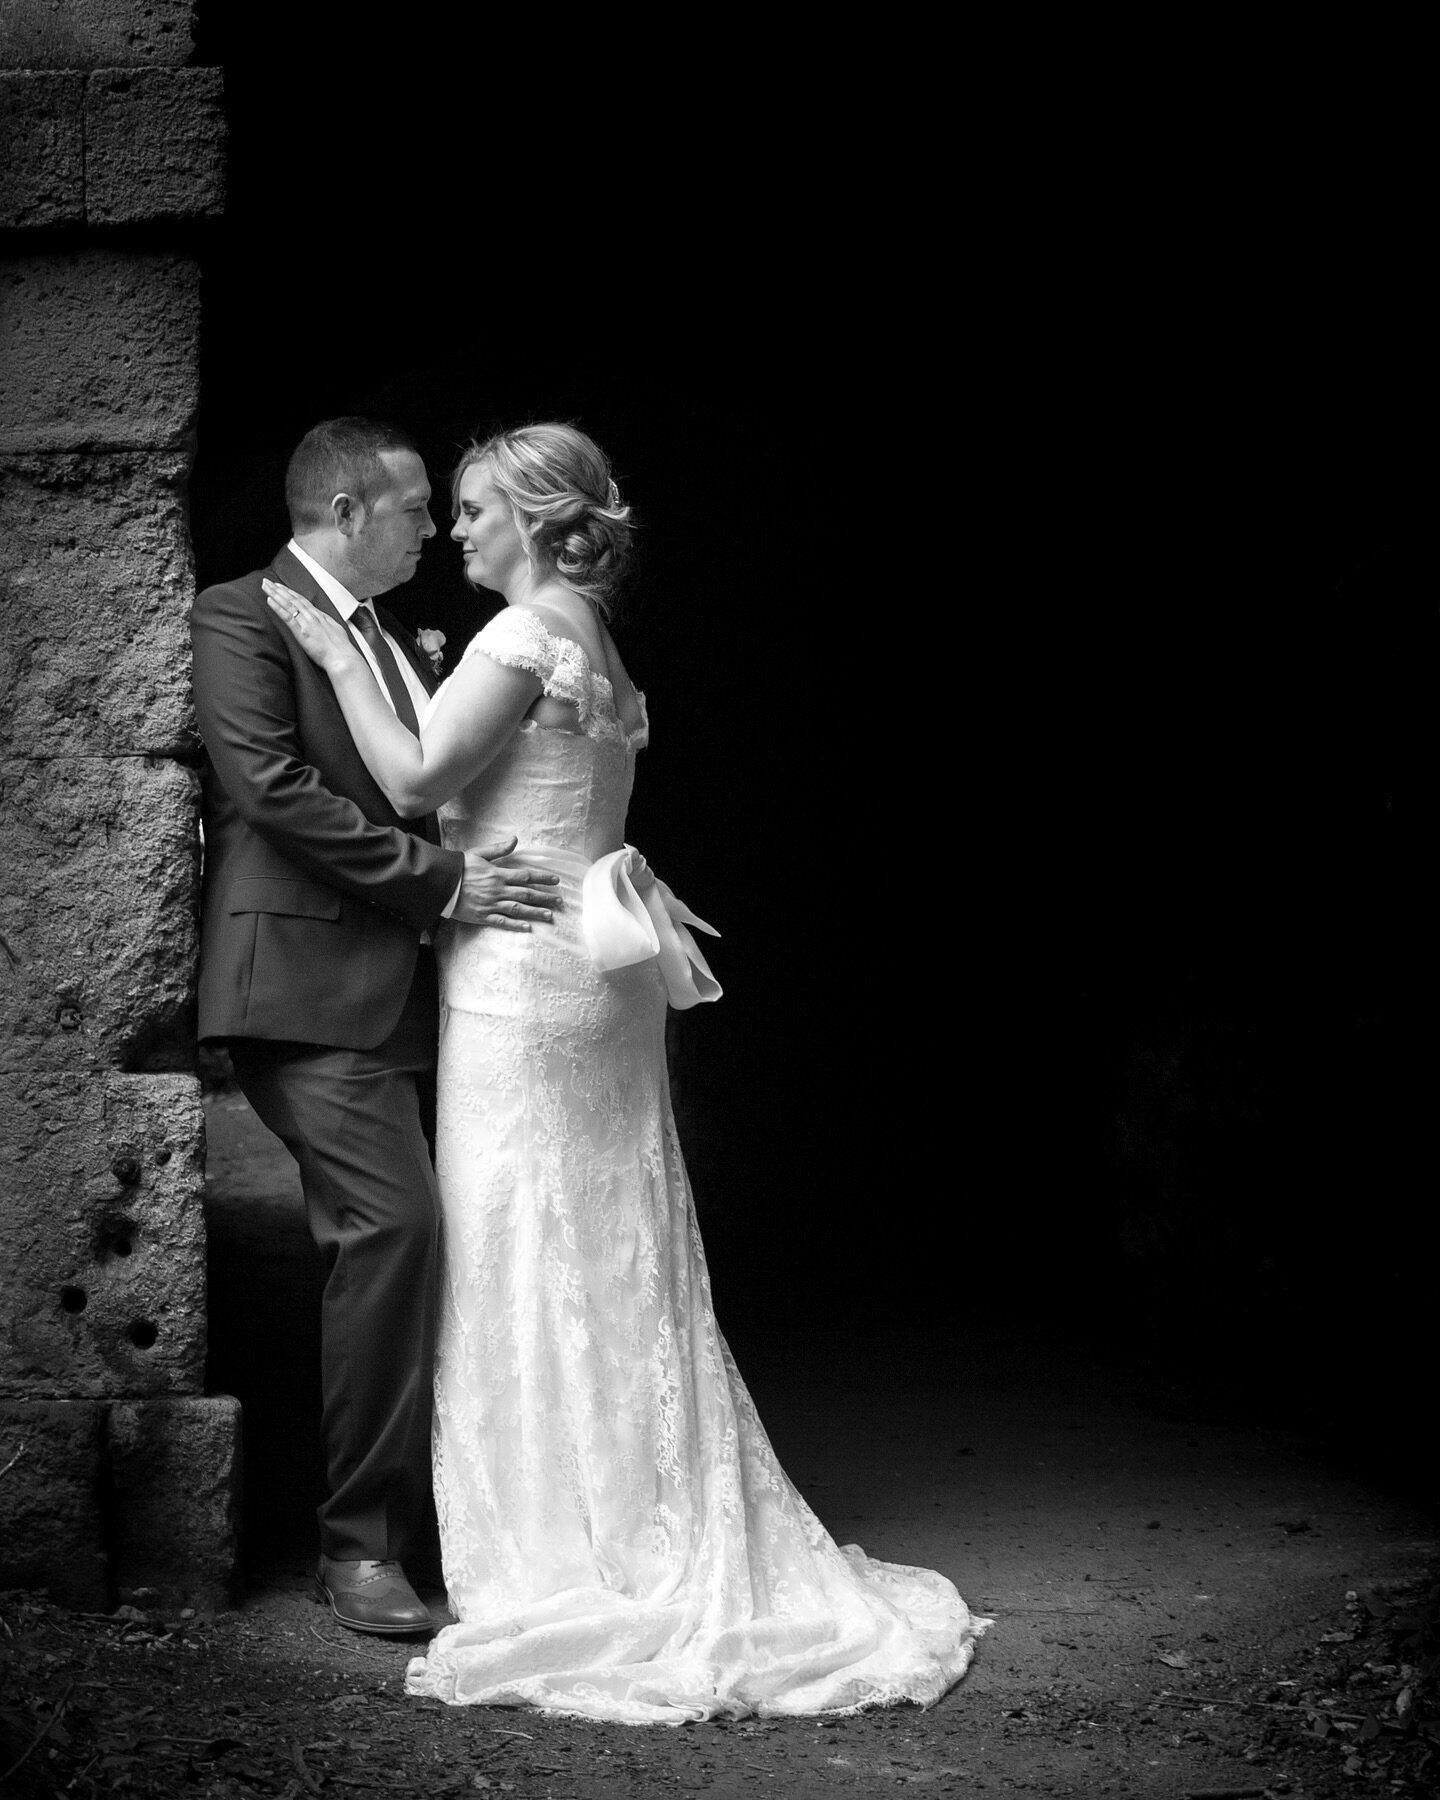 Sometimes it&rsquo;s the places you don&rsquo;t think of that can make a great picture&hellip; this was taken under a bridge! 

.
.
#weddingsinbath #bathwedding #weddingphotography #weddinginspiration #bridetobe #groom